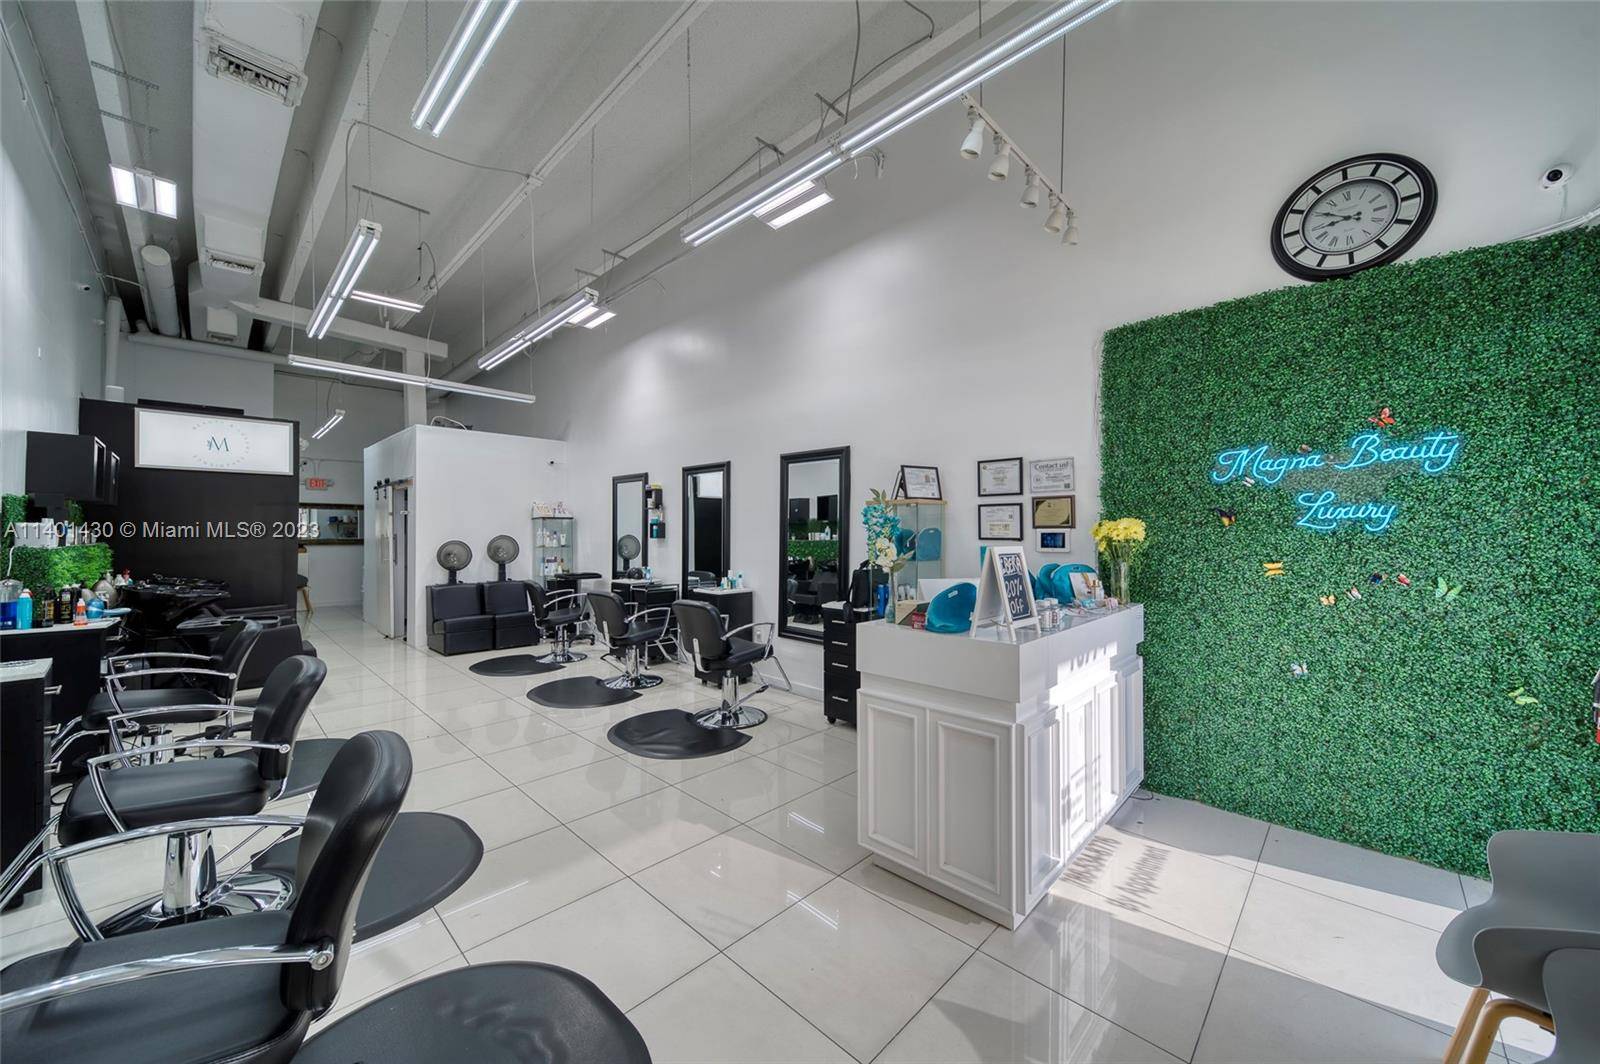 Full Service Beauty Salon for Sale in West Kendall.